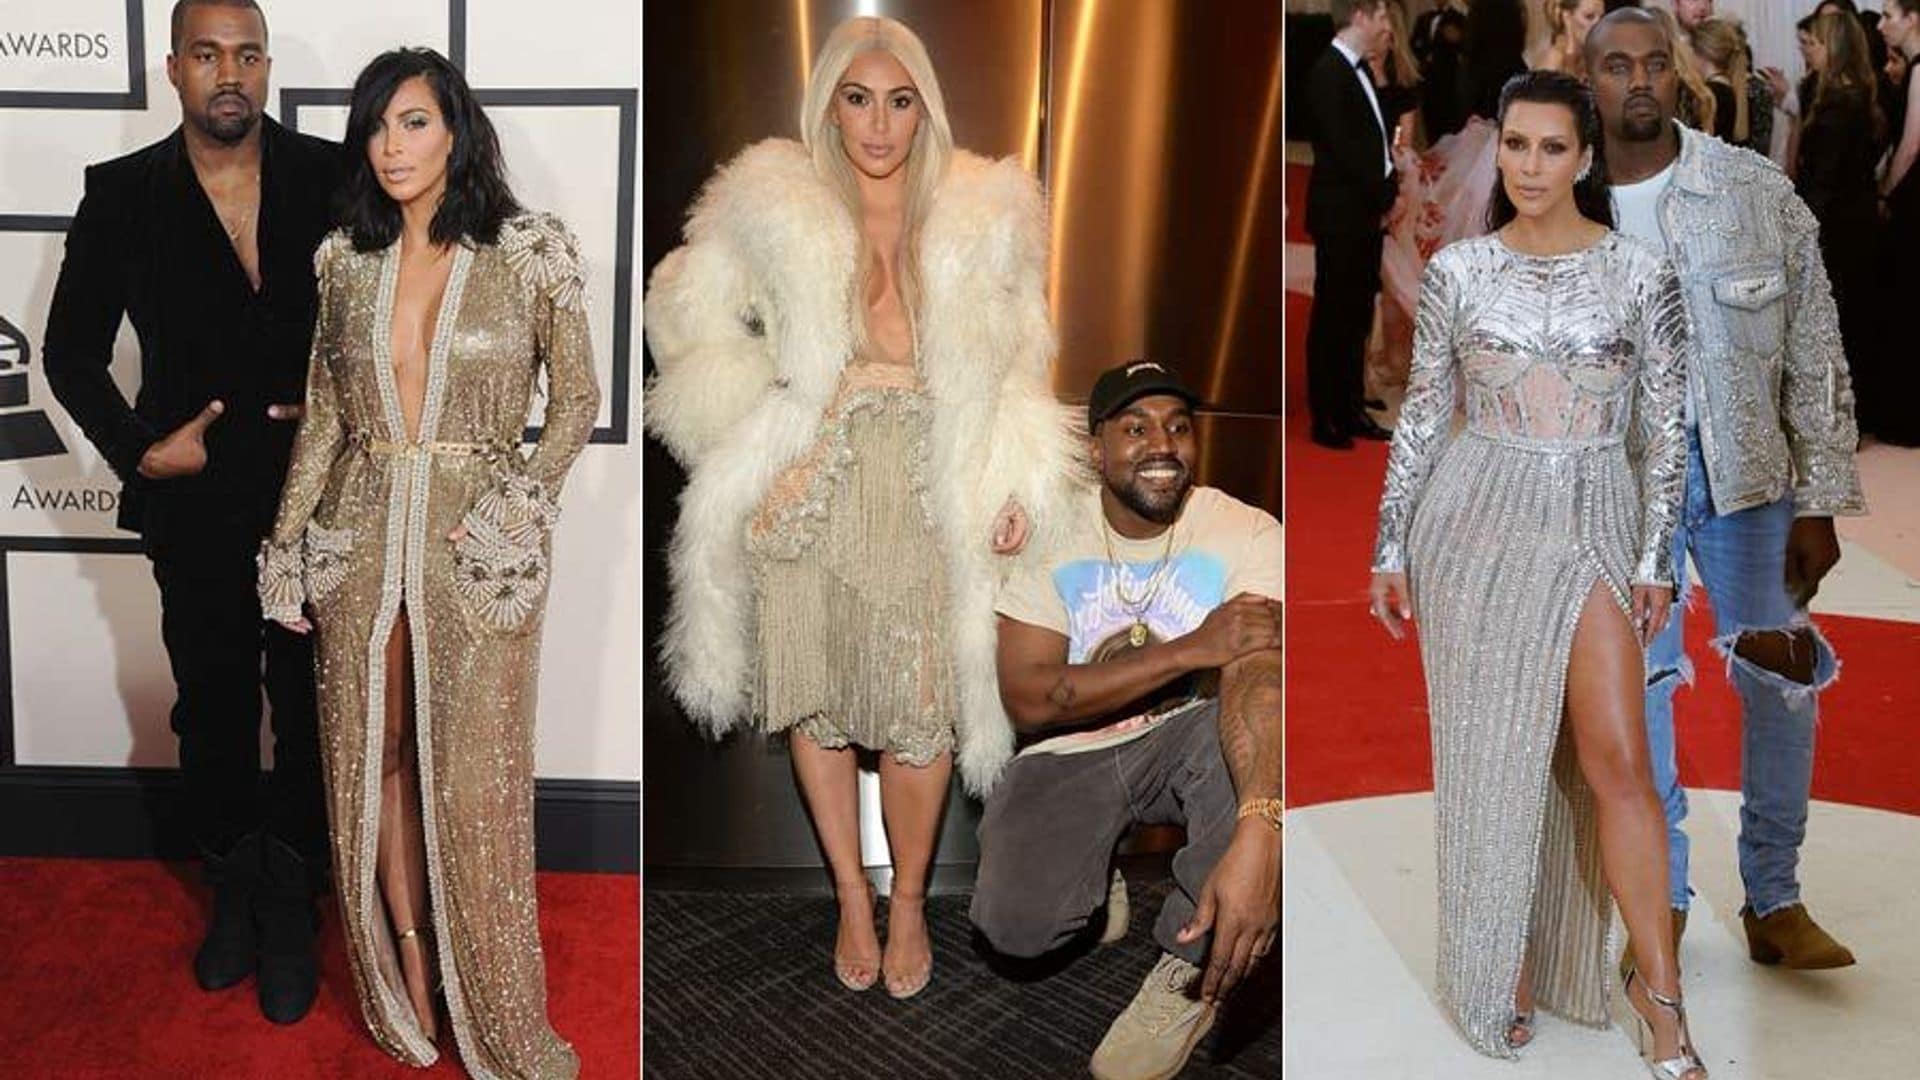 Since they began dating in Spring 2012, Kim Kardashian and Kanye West have become one of the most fashionable couples in Hollywood.
<br>Kanye, who designs his own clothing collection, often gives his wife style advice and encourages her to wear more daring looks.
<br>Click through our gallery to see the couple's most fashionable moments.